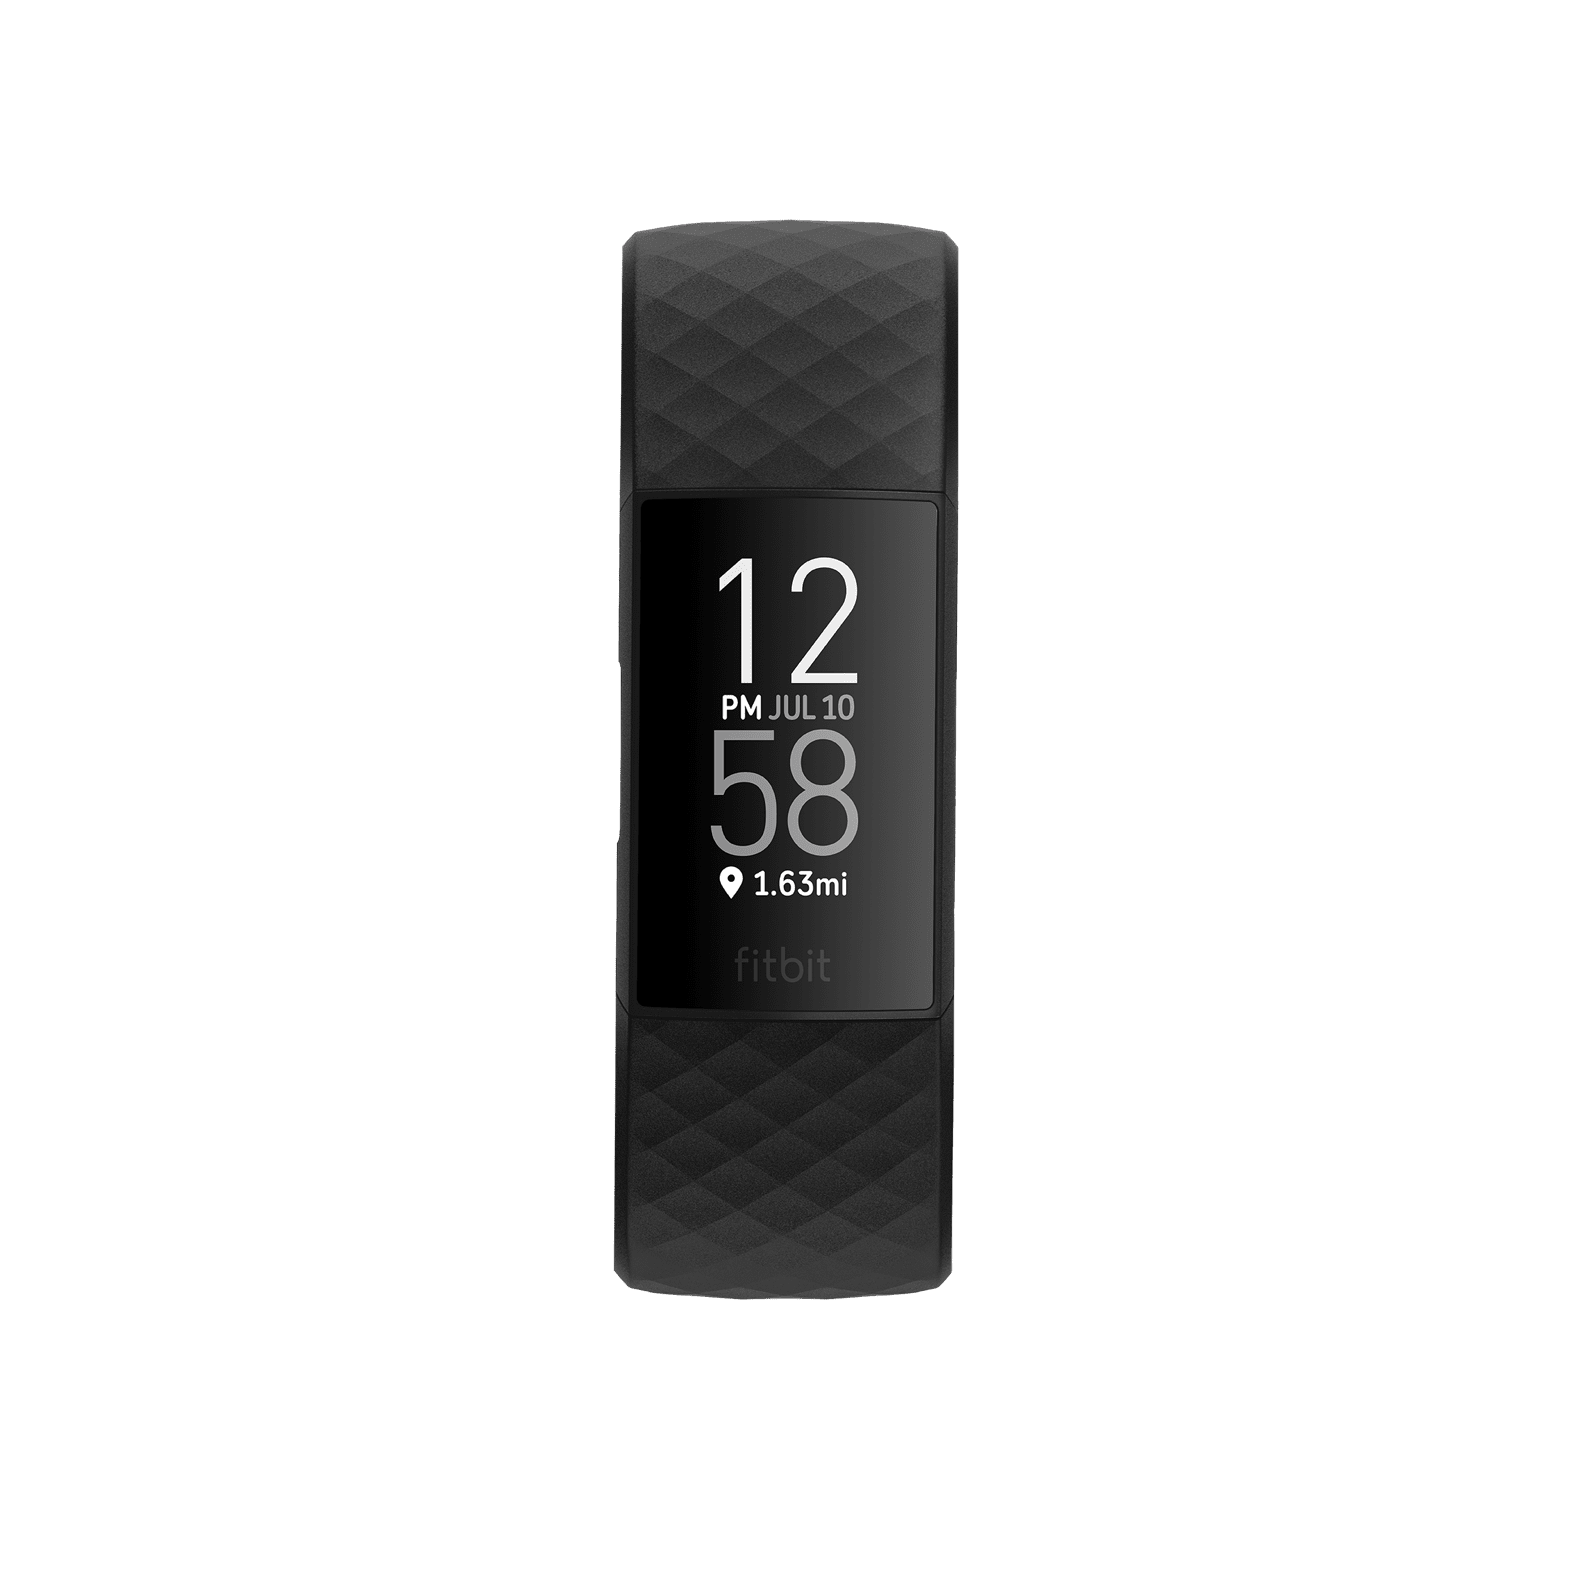 fitbit protection plan charge 4